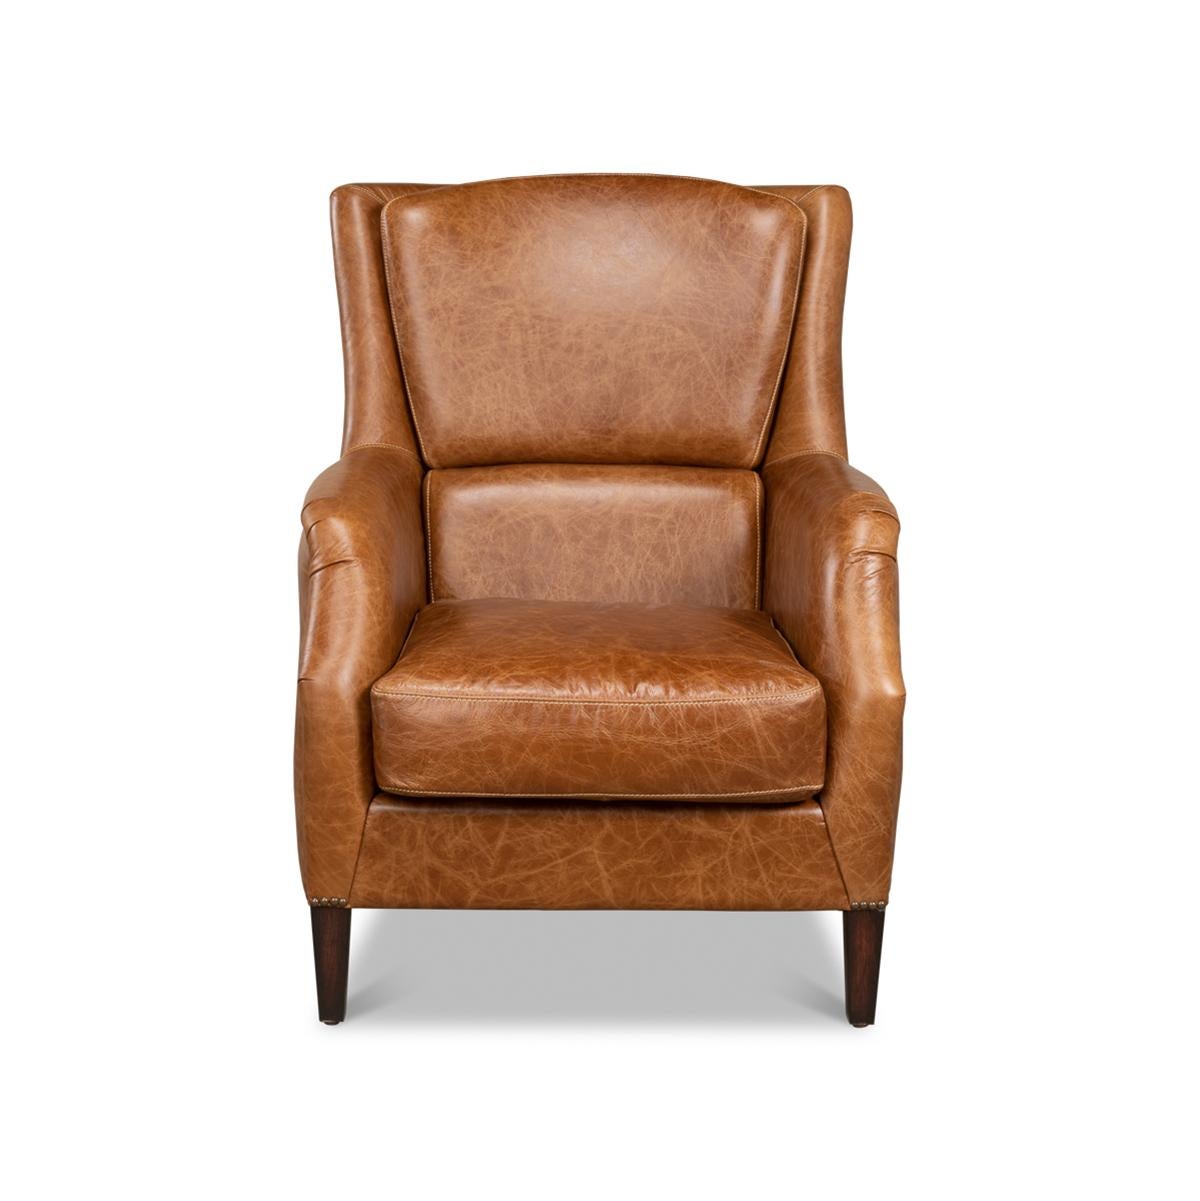 A traditional brown leather armchair with nailhead trim accents. This classic chair is crafted with pure Aniline top-grade leather in a Cuba brown color.

Dimensions: 30